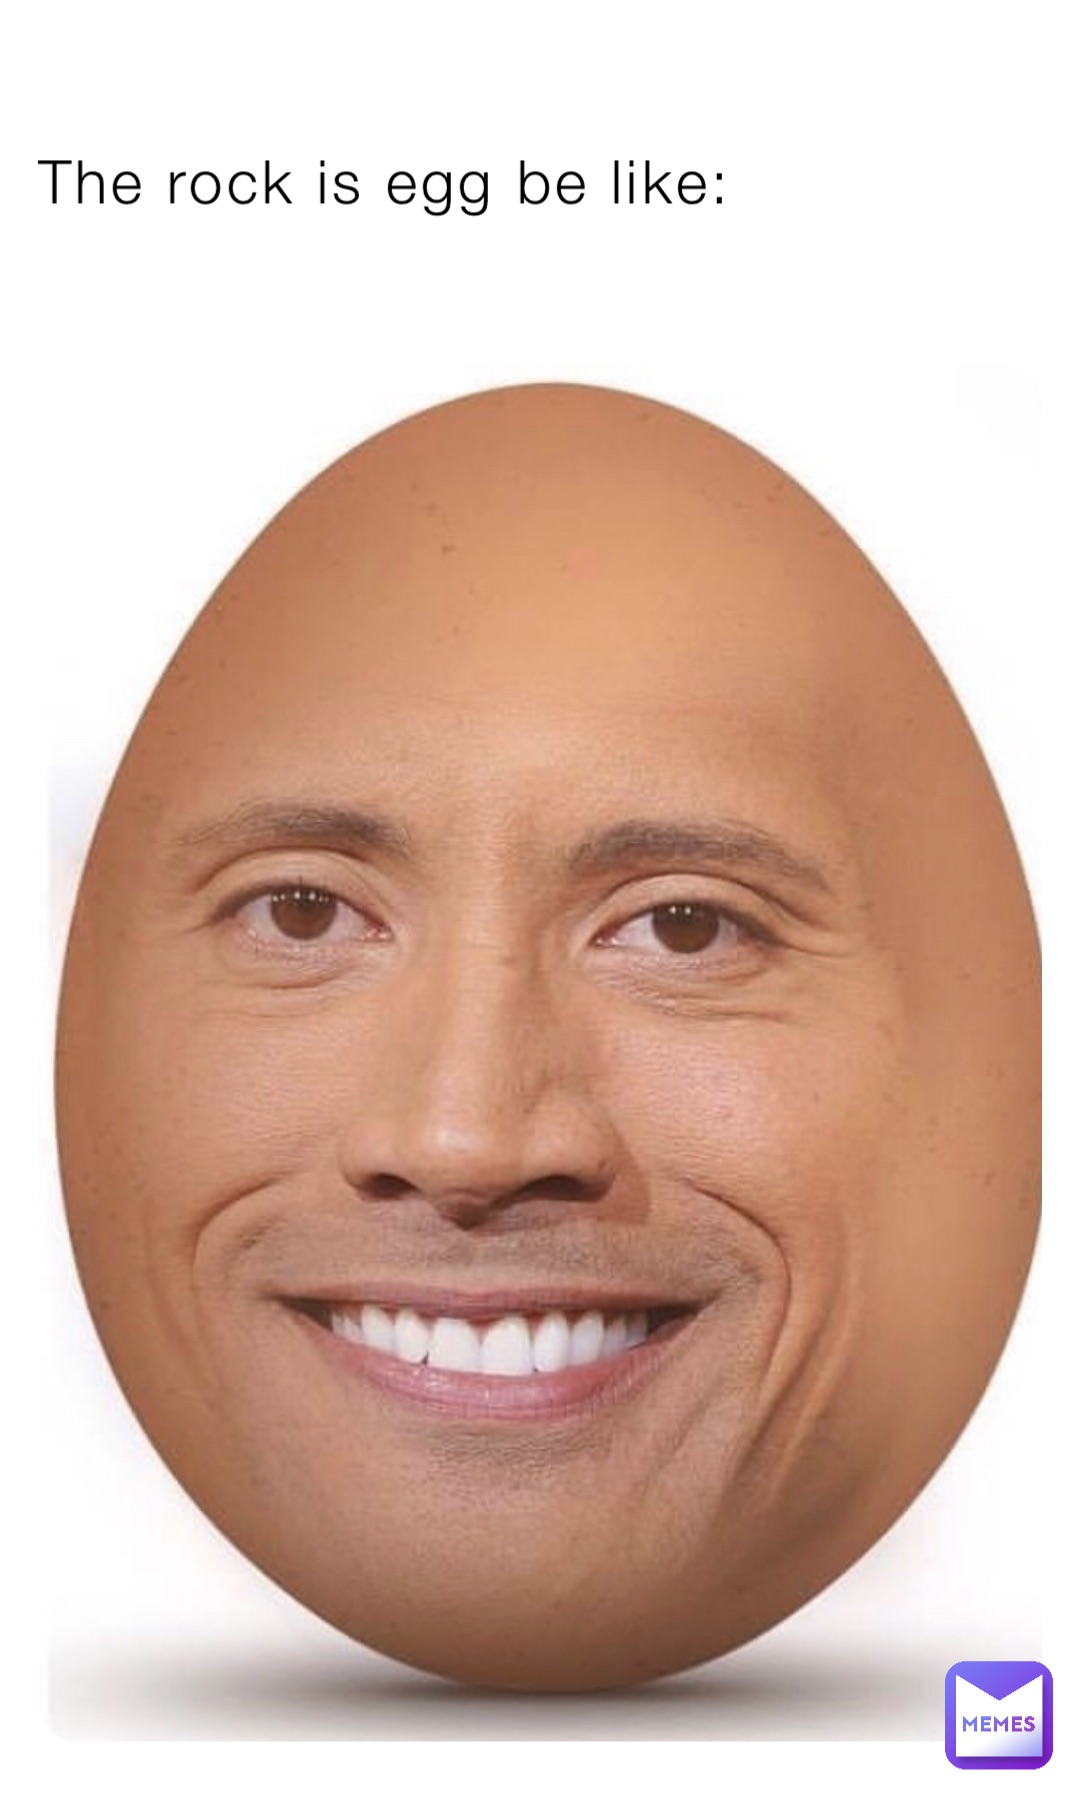 The rock is egg be like: